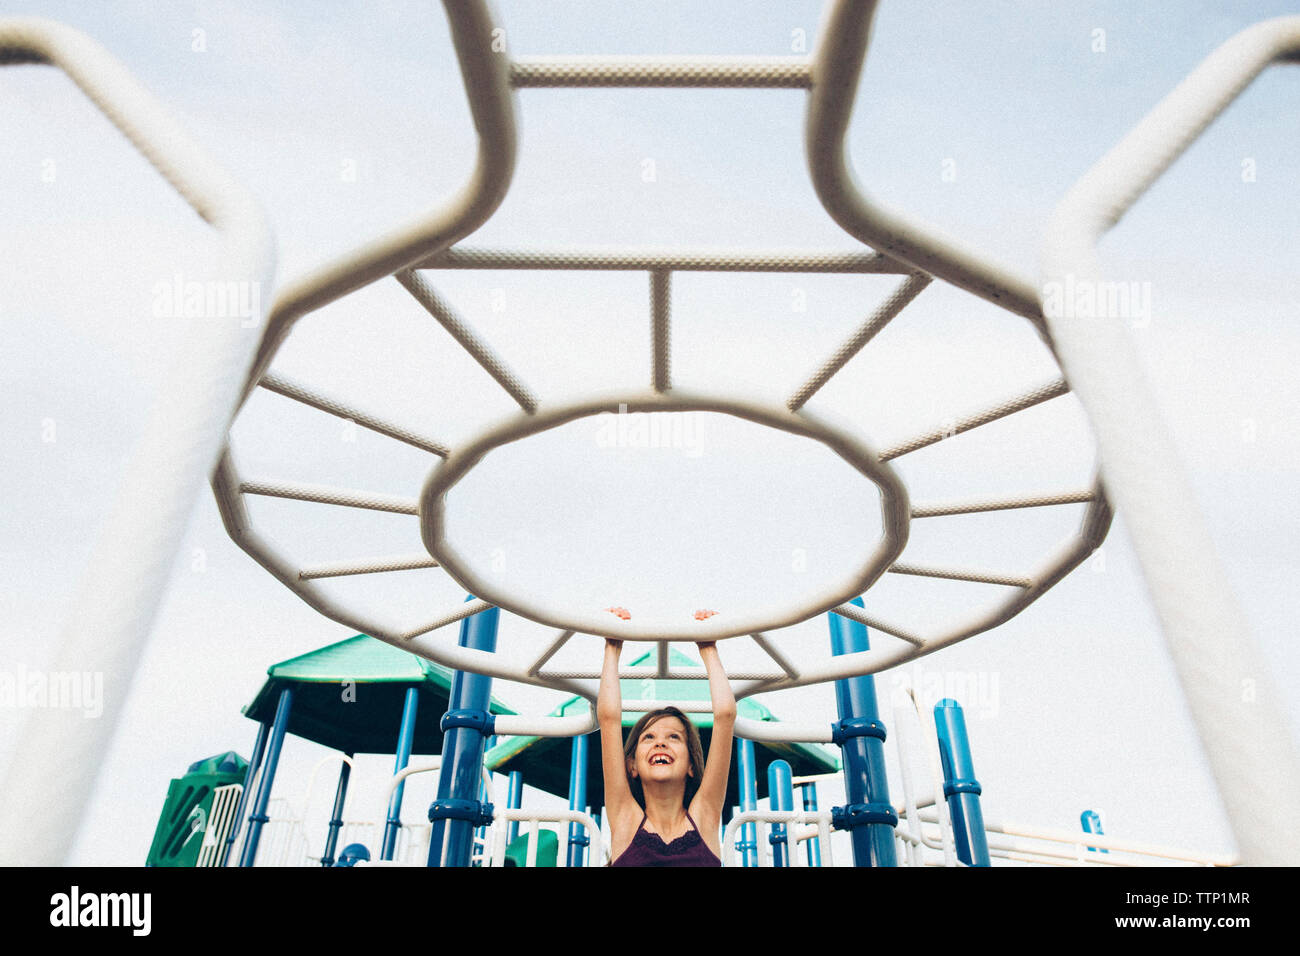 Playful girl hanging on jungle gym in playground Stock Photo